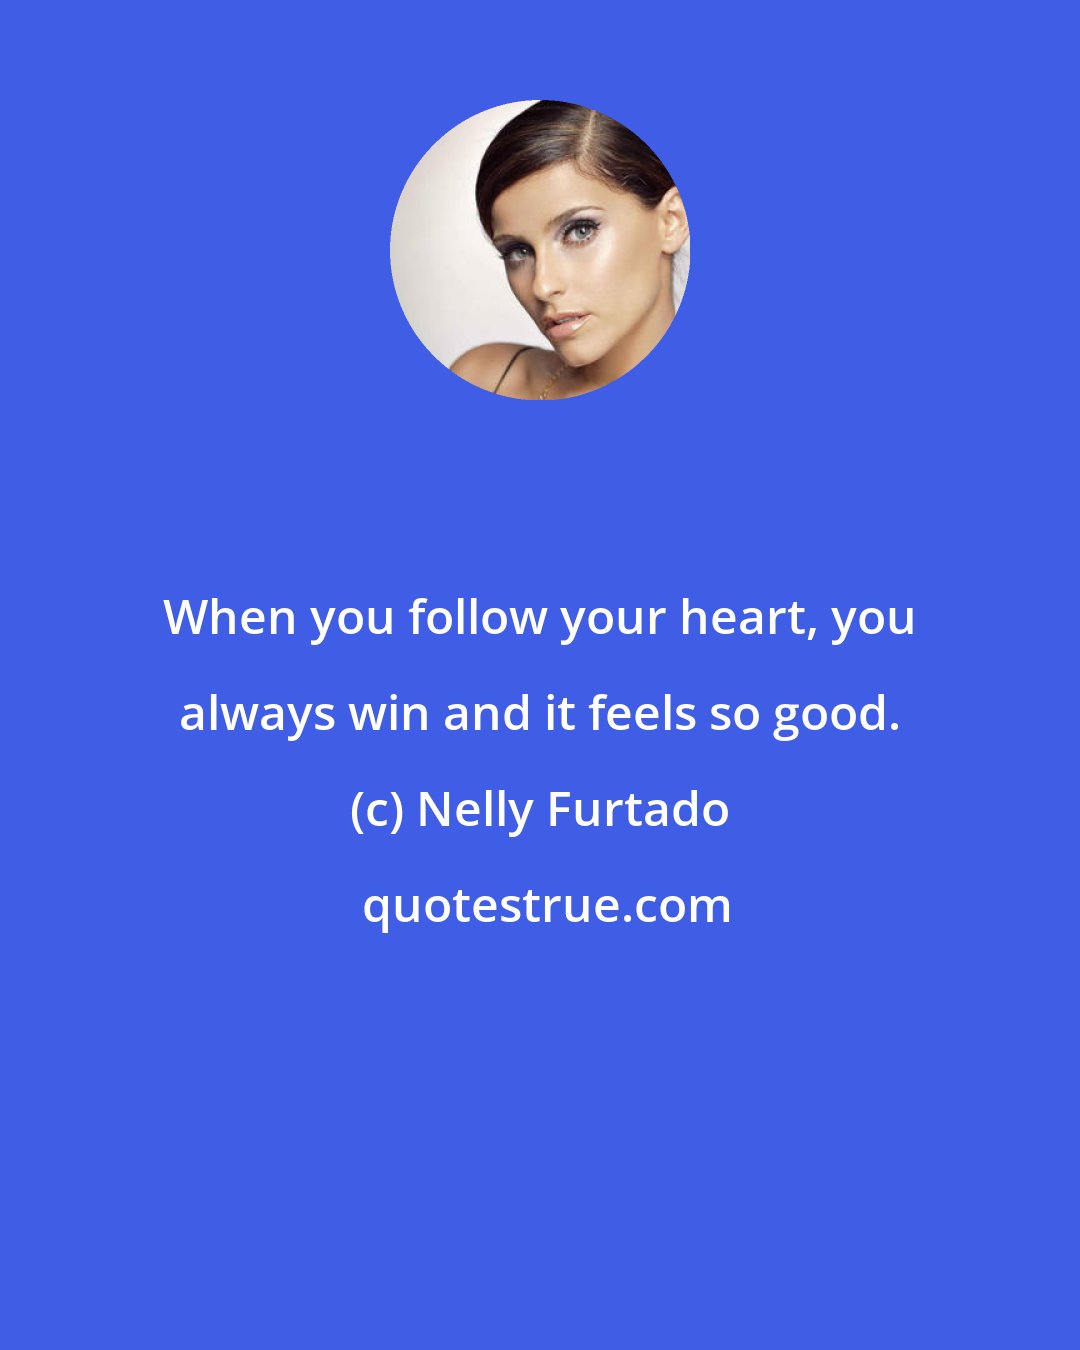 Nelly Furtado: When you follow your heart, you always win and it feels so good.